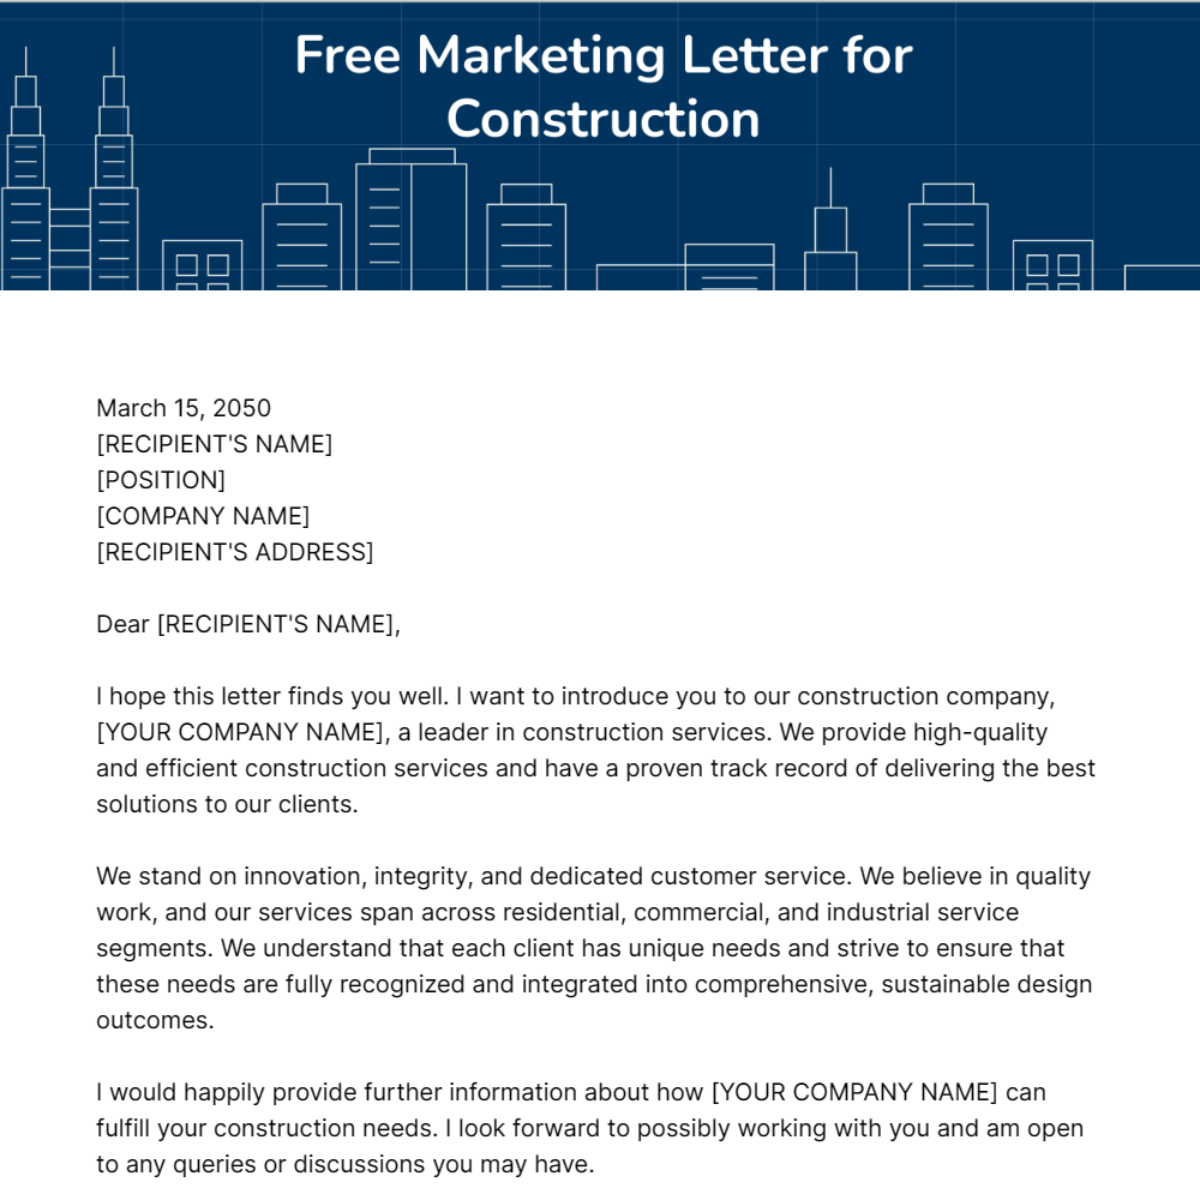 Marketing Letter for Construction Template